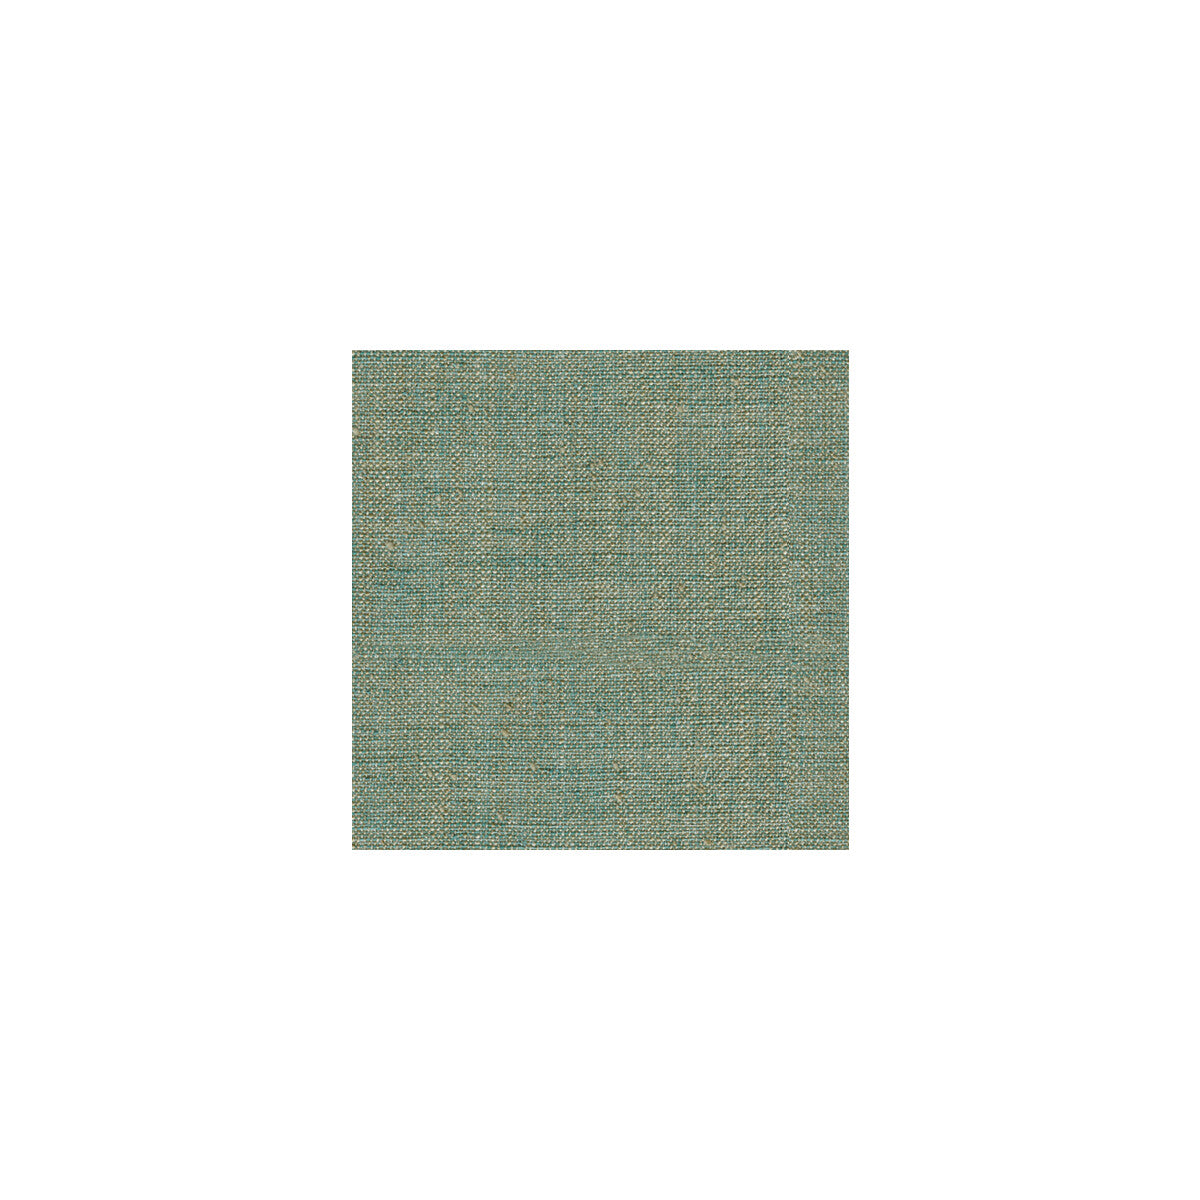 Blitz fabric in turq color - pattern 28752.135.0 - by Kravet Smart